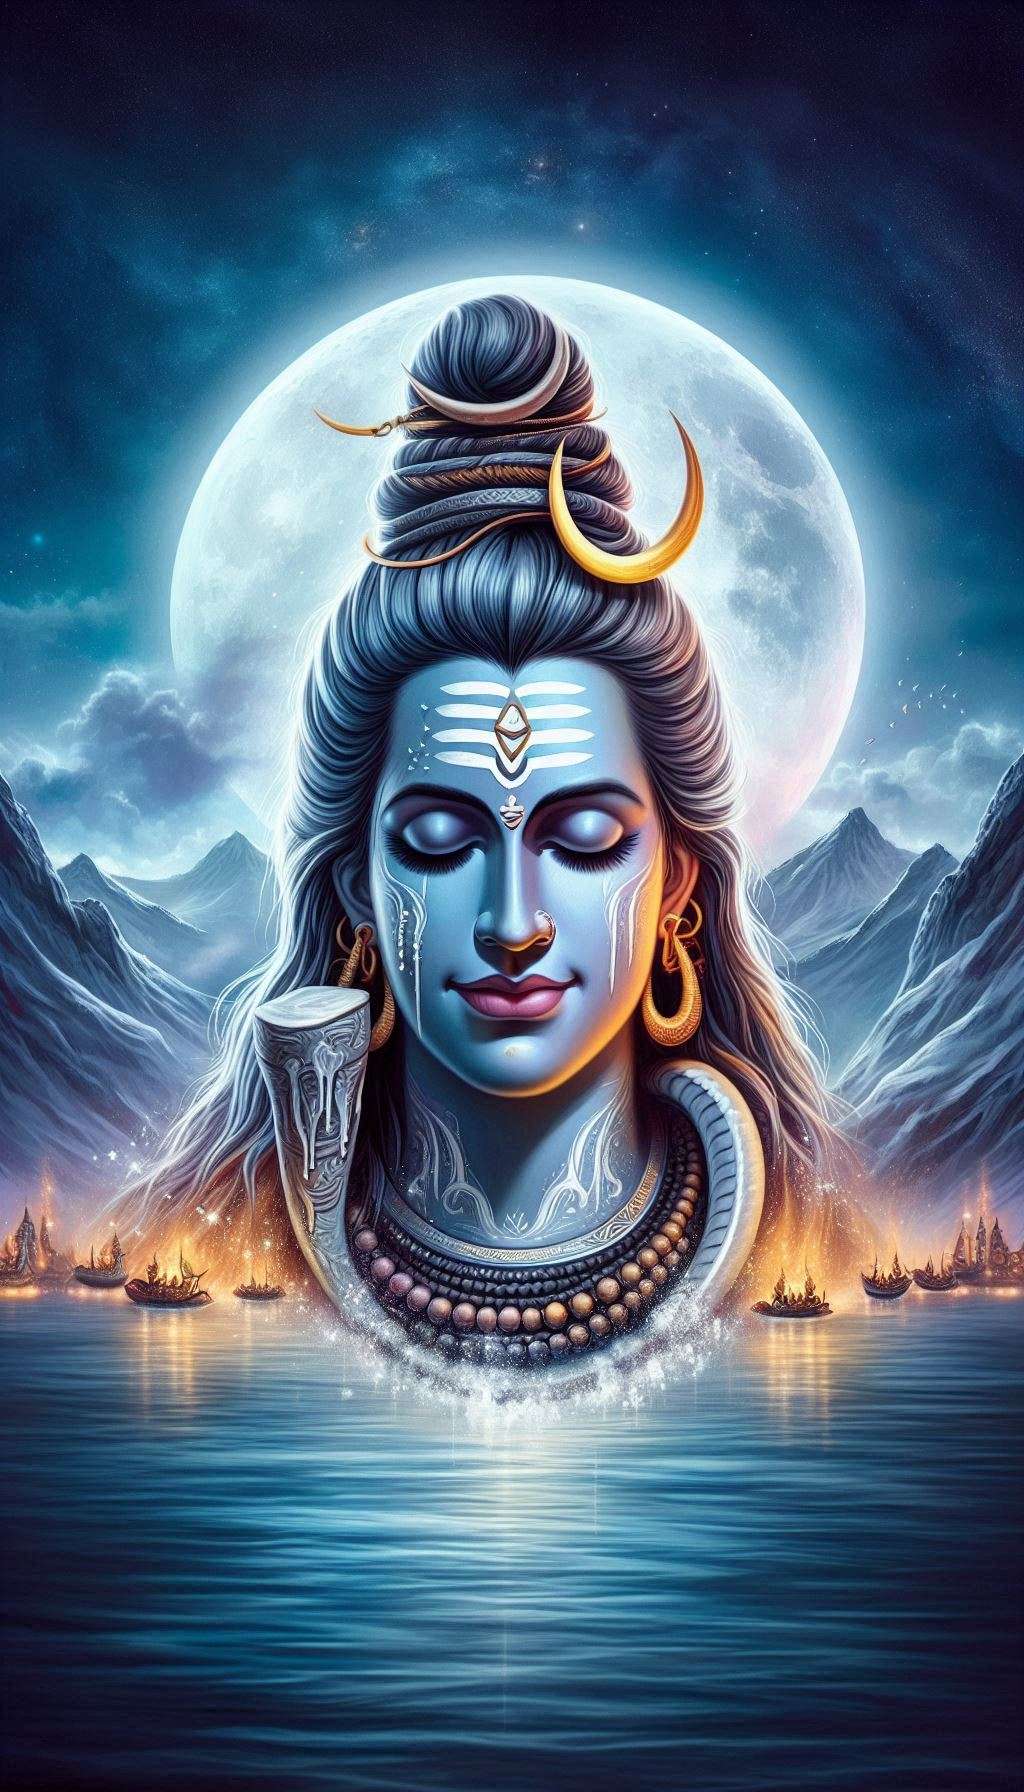 high-resolution images of lord shiva